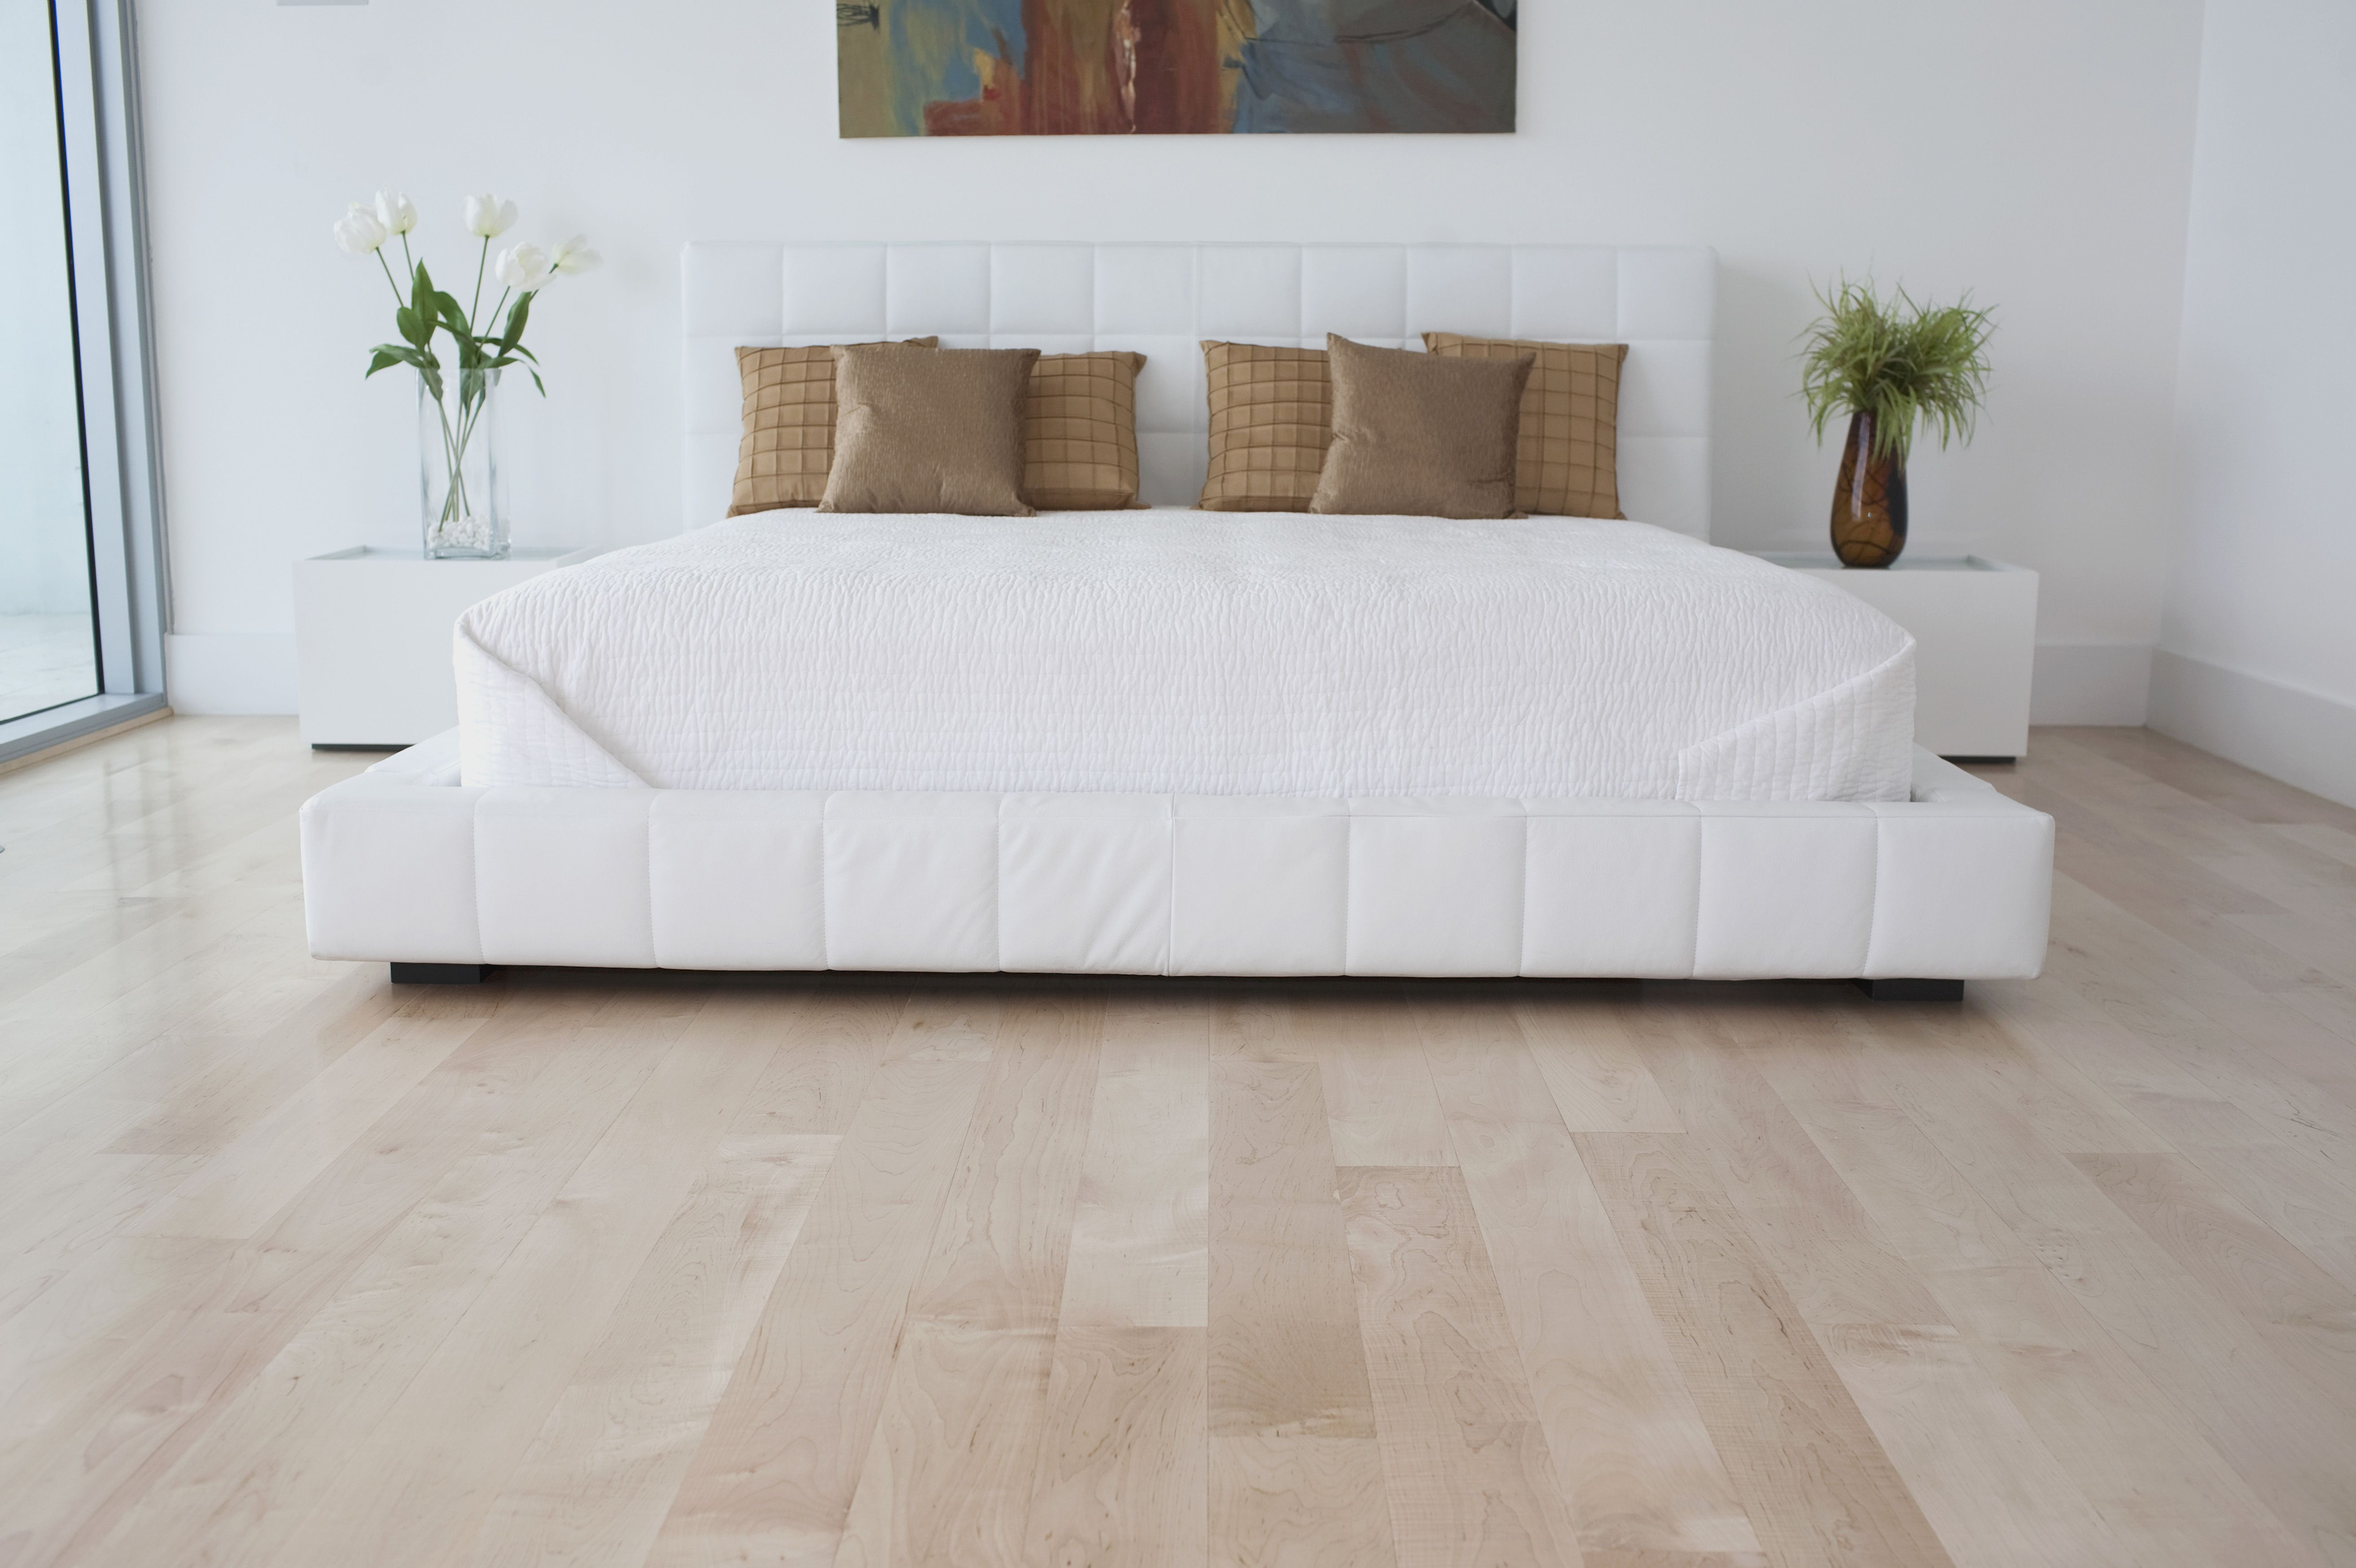 painted hardwood floors ideas of 5 best bedroom flooring materials with interiors of a bedroom 126171674 57be063d3df78cc16e3cc6cf